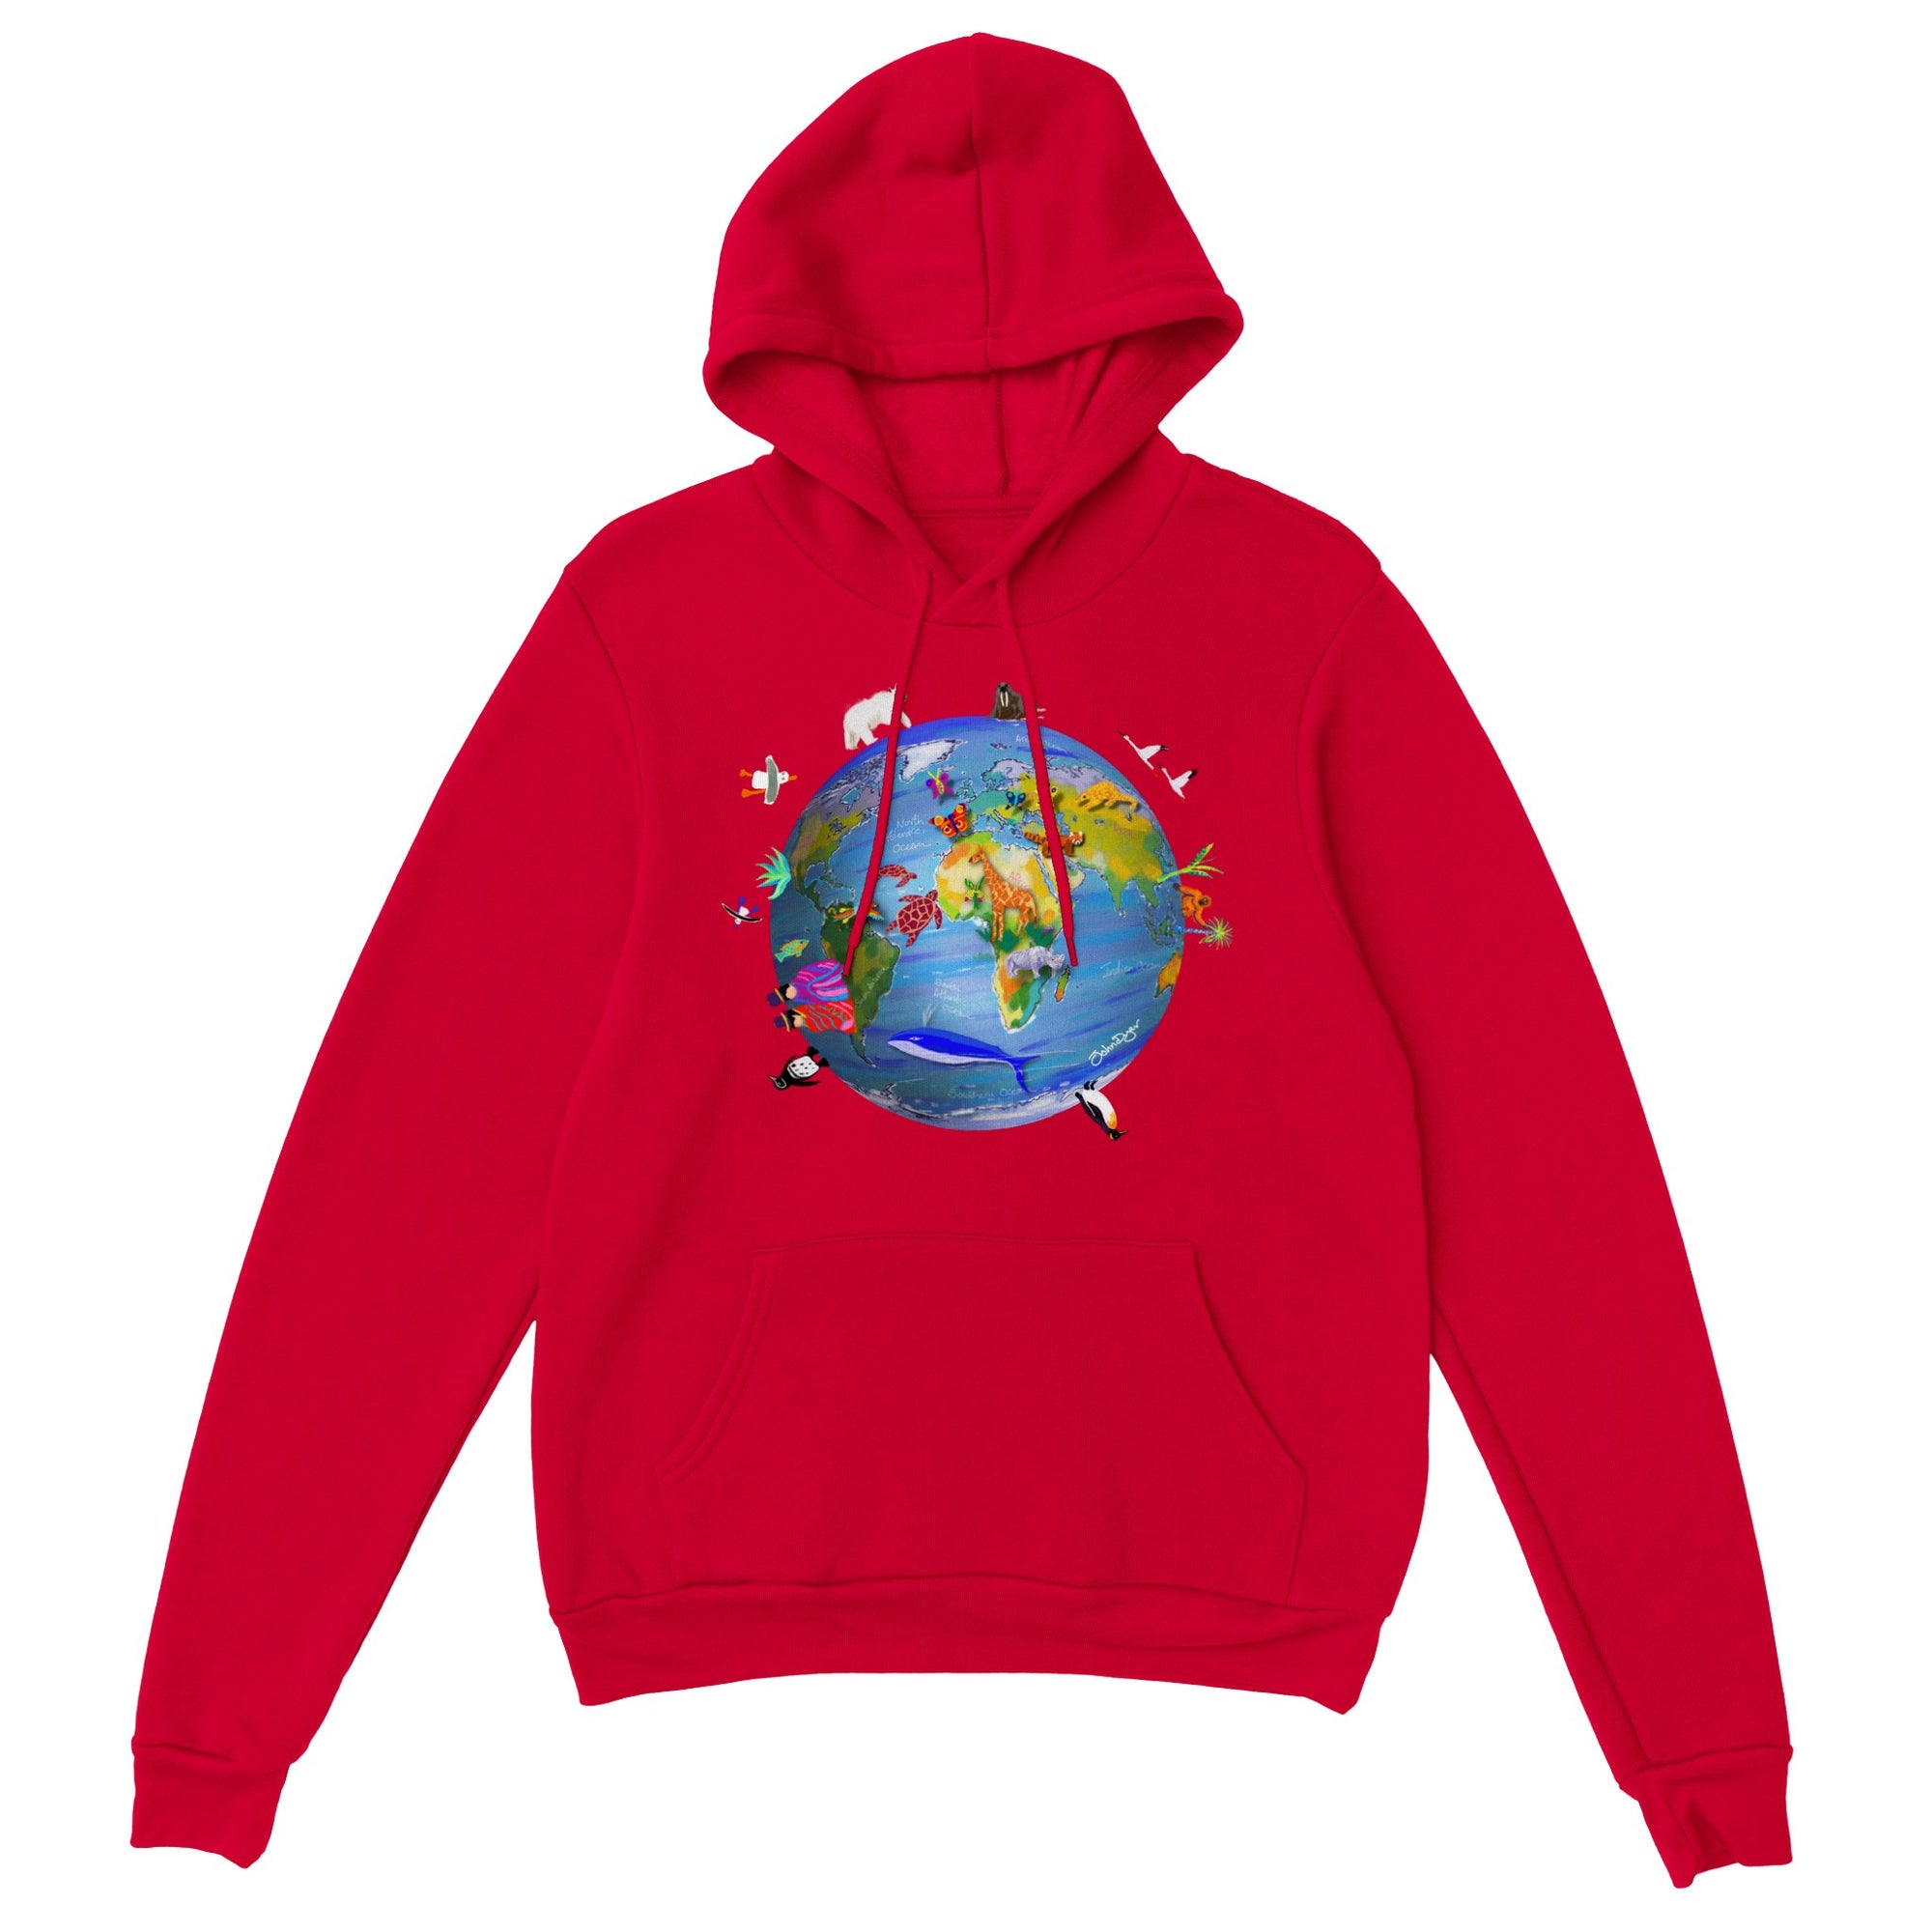 John Dyer designed 'Last Chance To Paint' Wildlife & Climate Change Earth Design Classic Unisex Pullover Hoodie